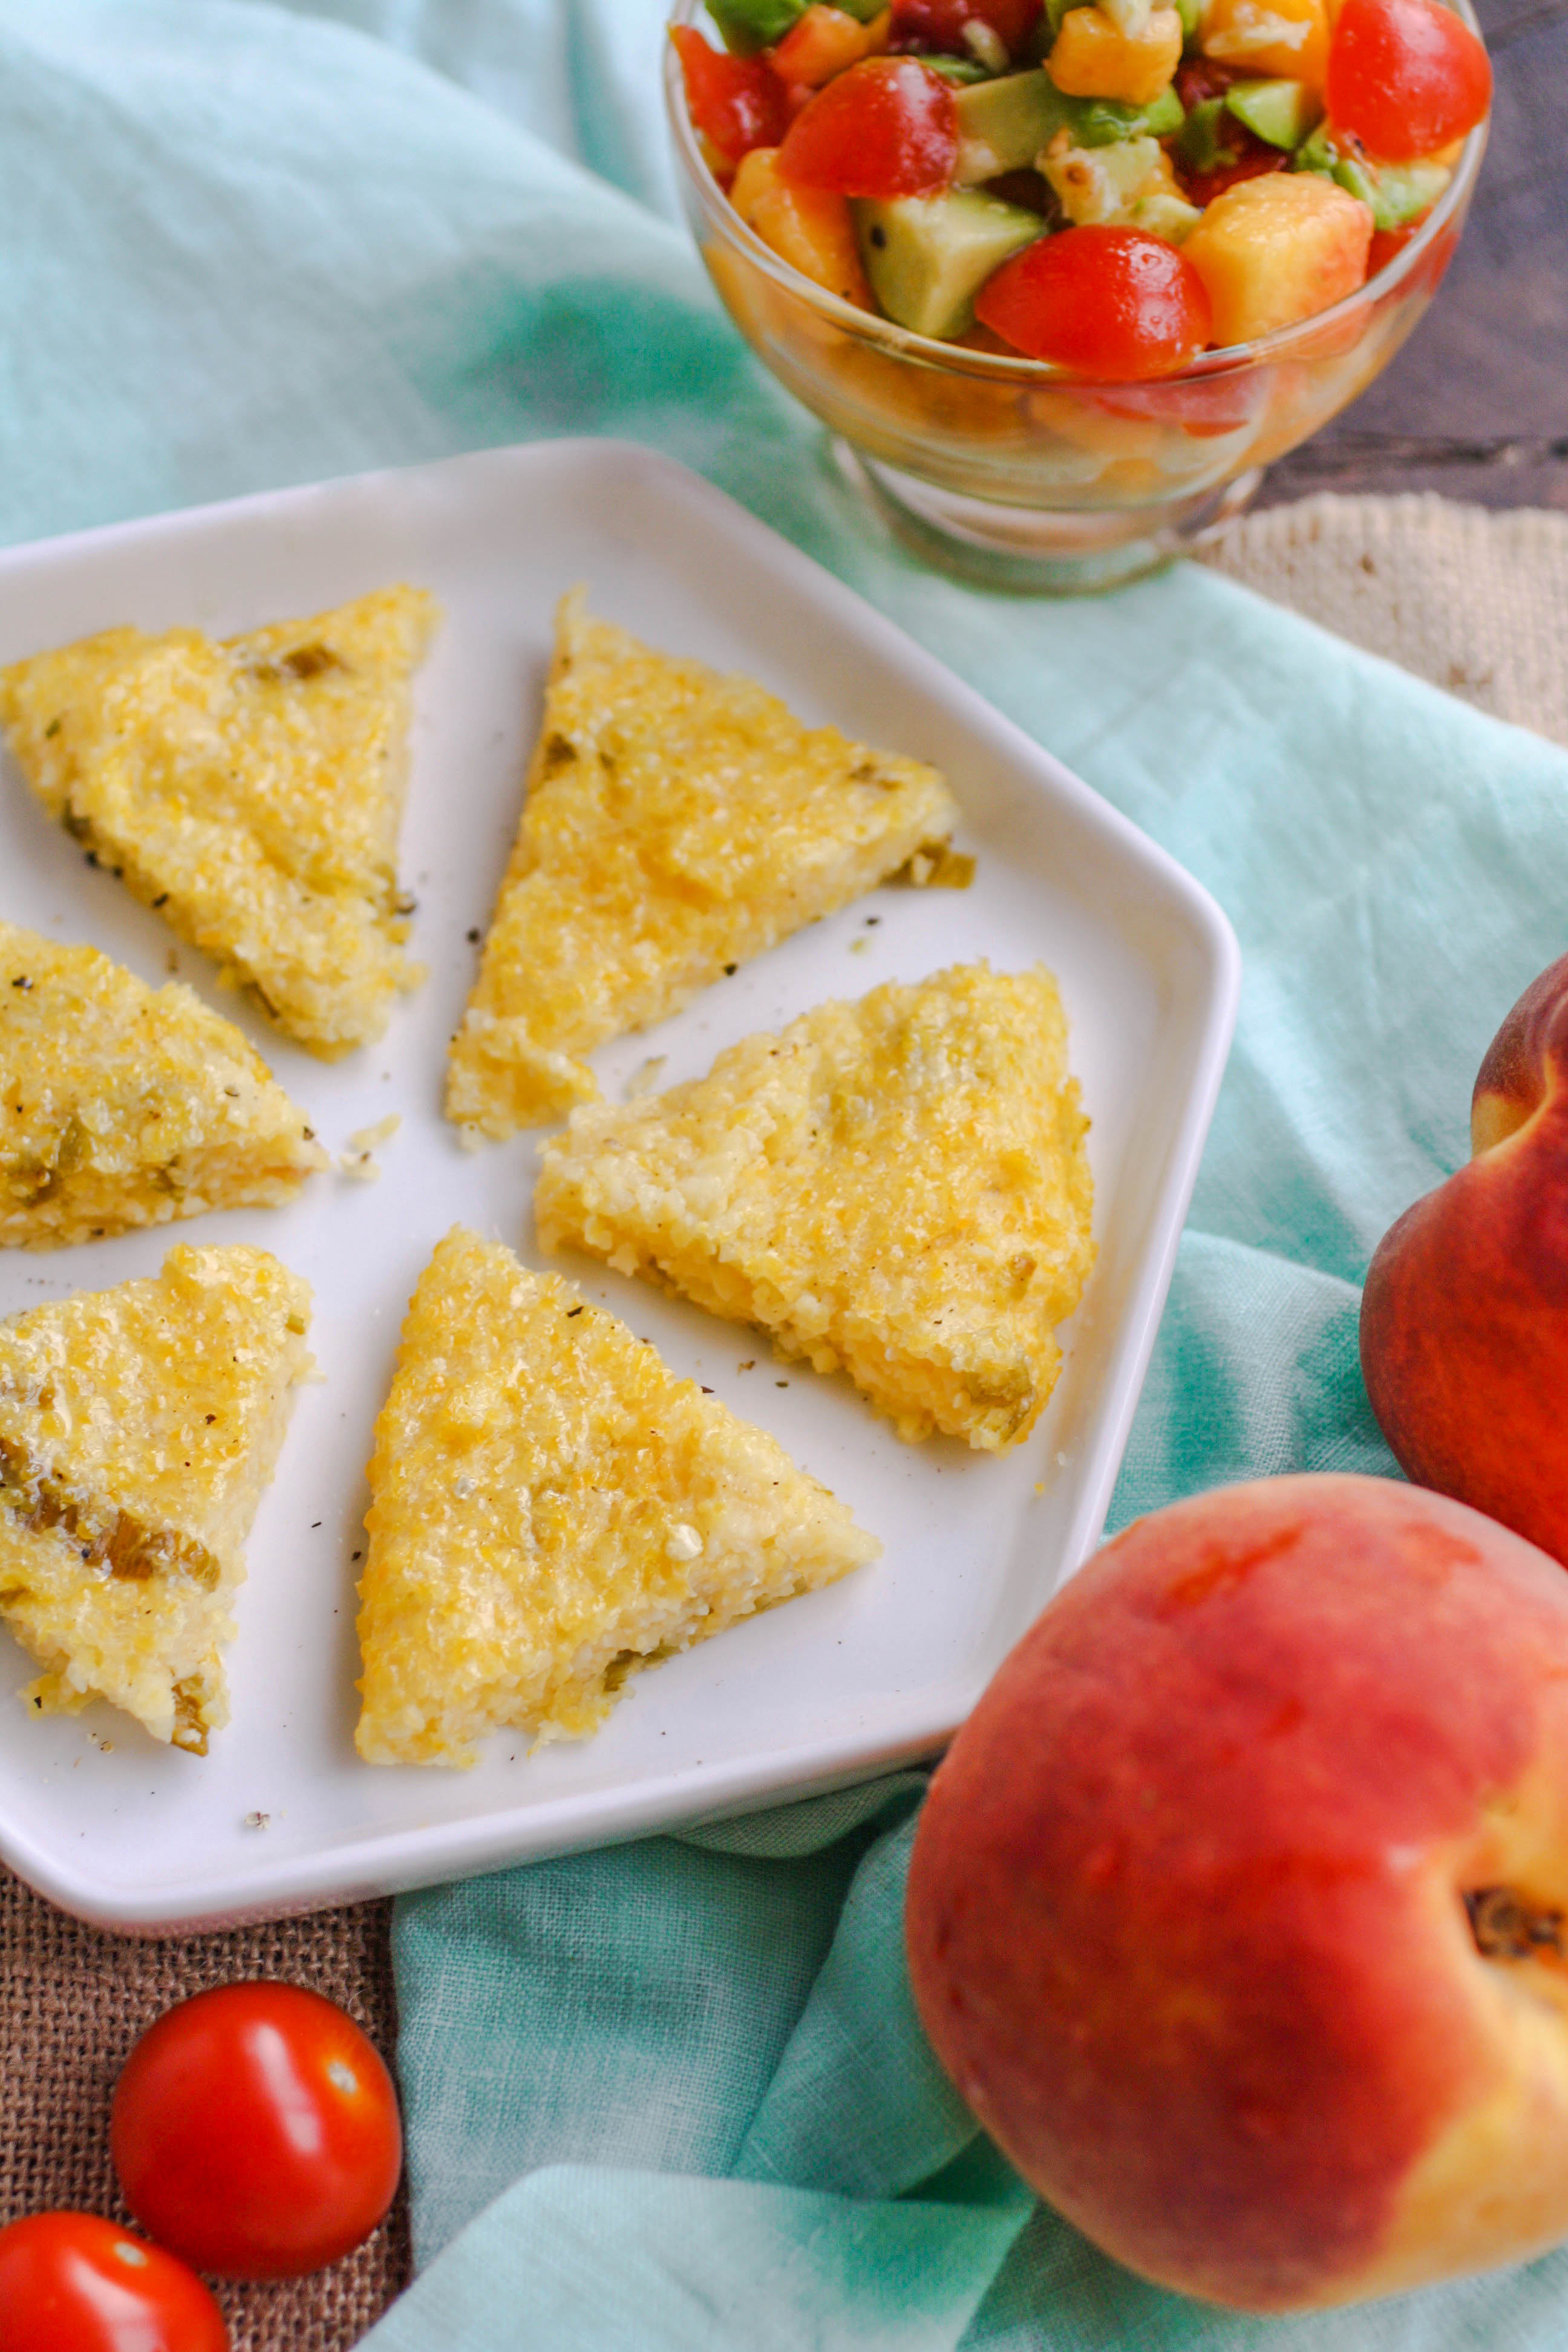 Hatch Chile Grits Cakes with Peach-Citrus Salsa are tasty, no matter what shape they're in! Make these Hatch Chile Grits Cakes with Peach-Citrus Salsa in your favorite shape!